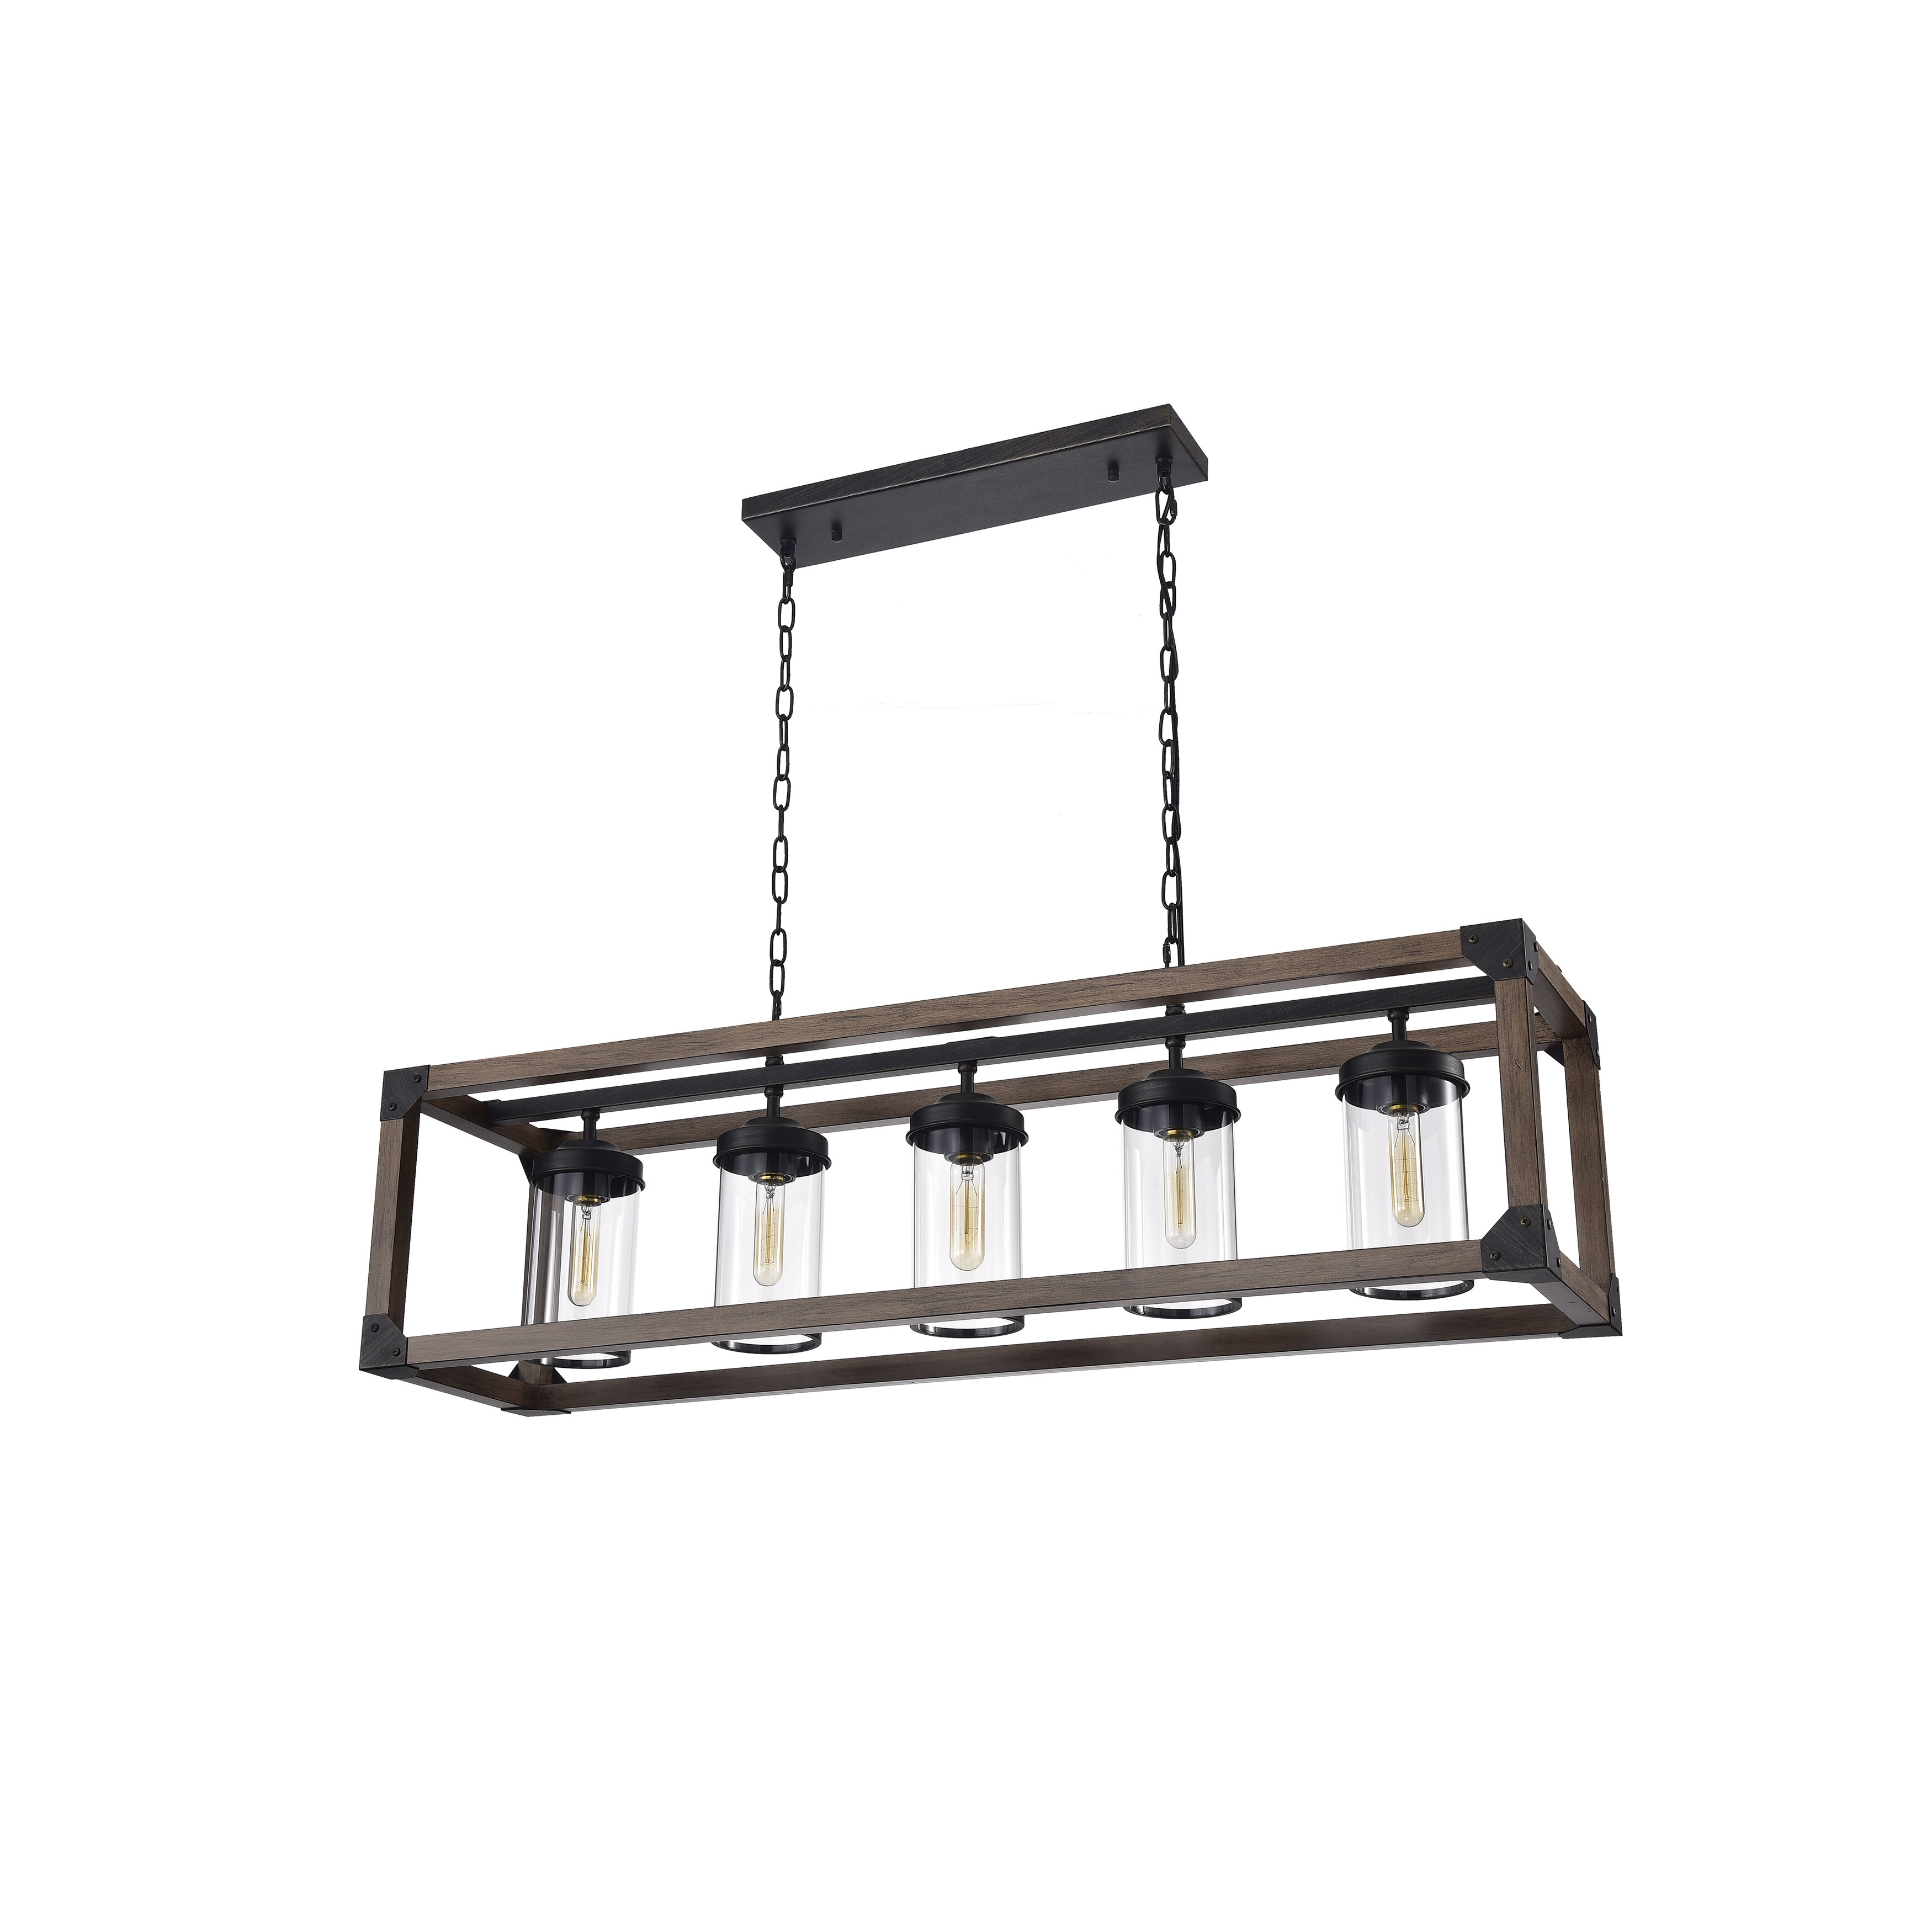 Wrought Iron Kitchen Light Fixtures Love Wrought Iron With